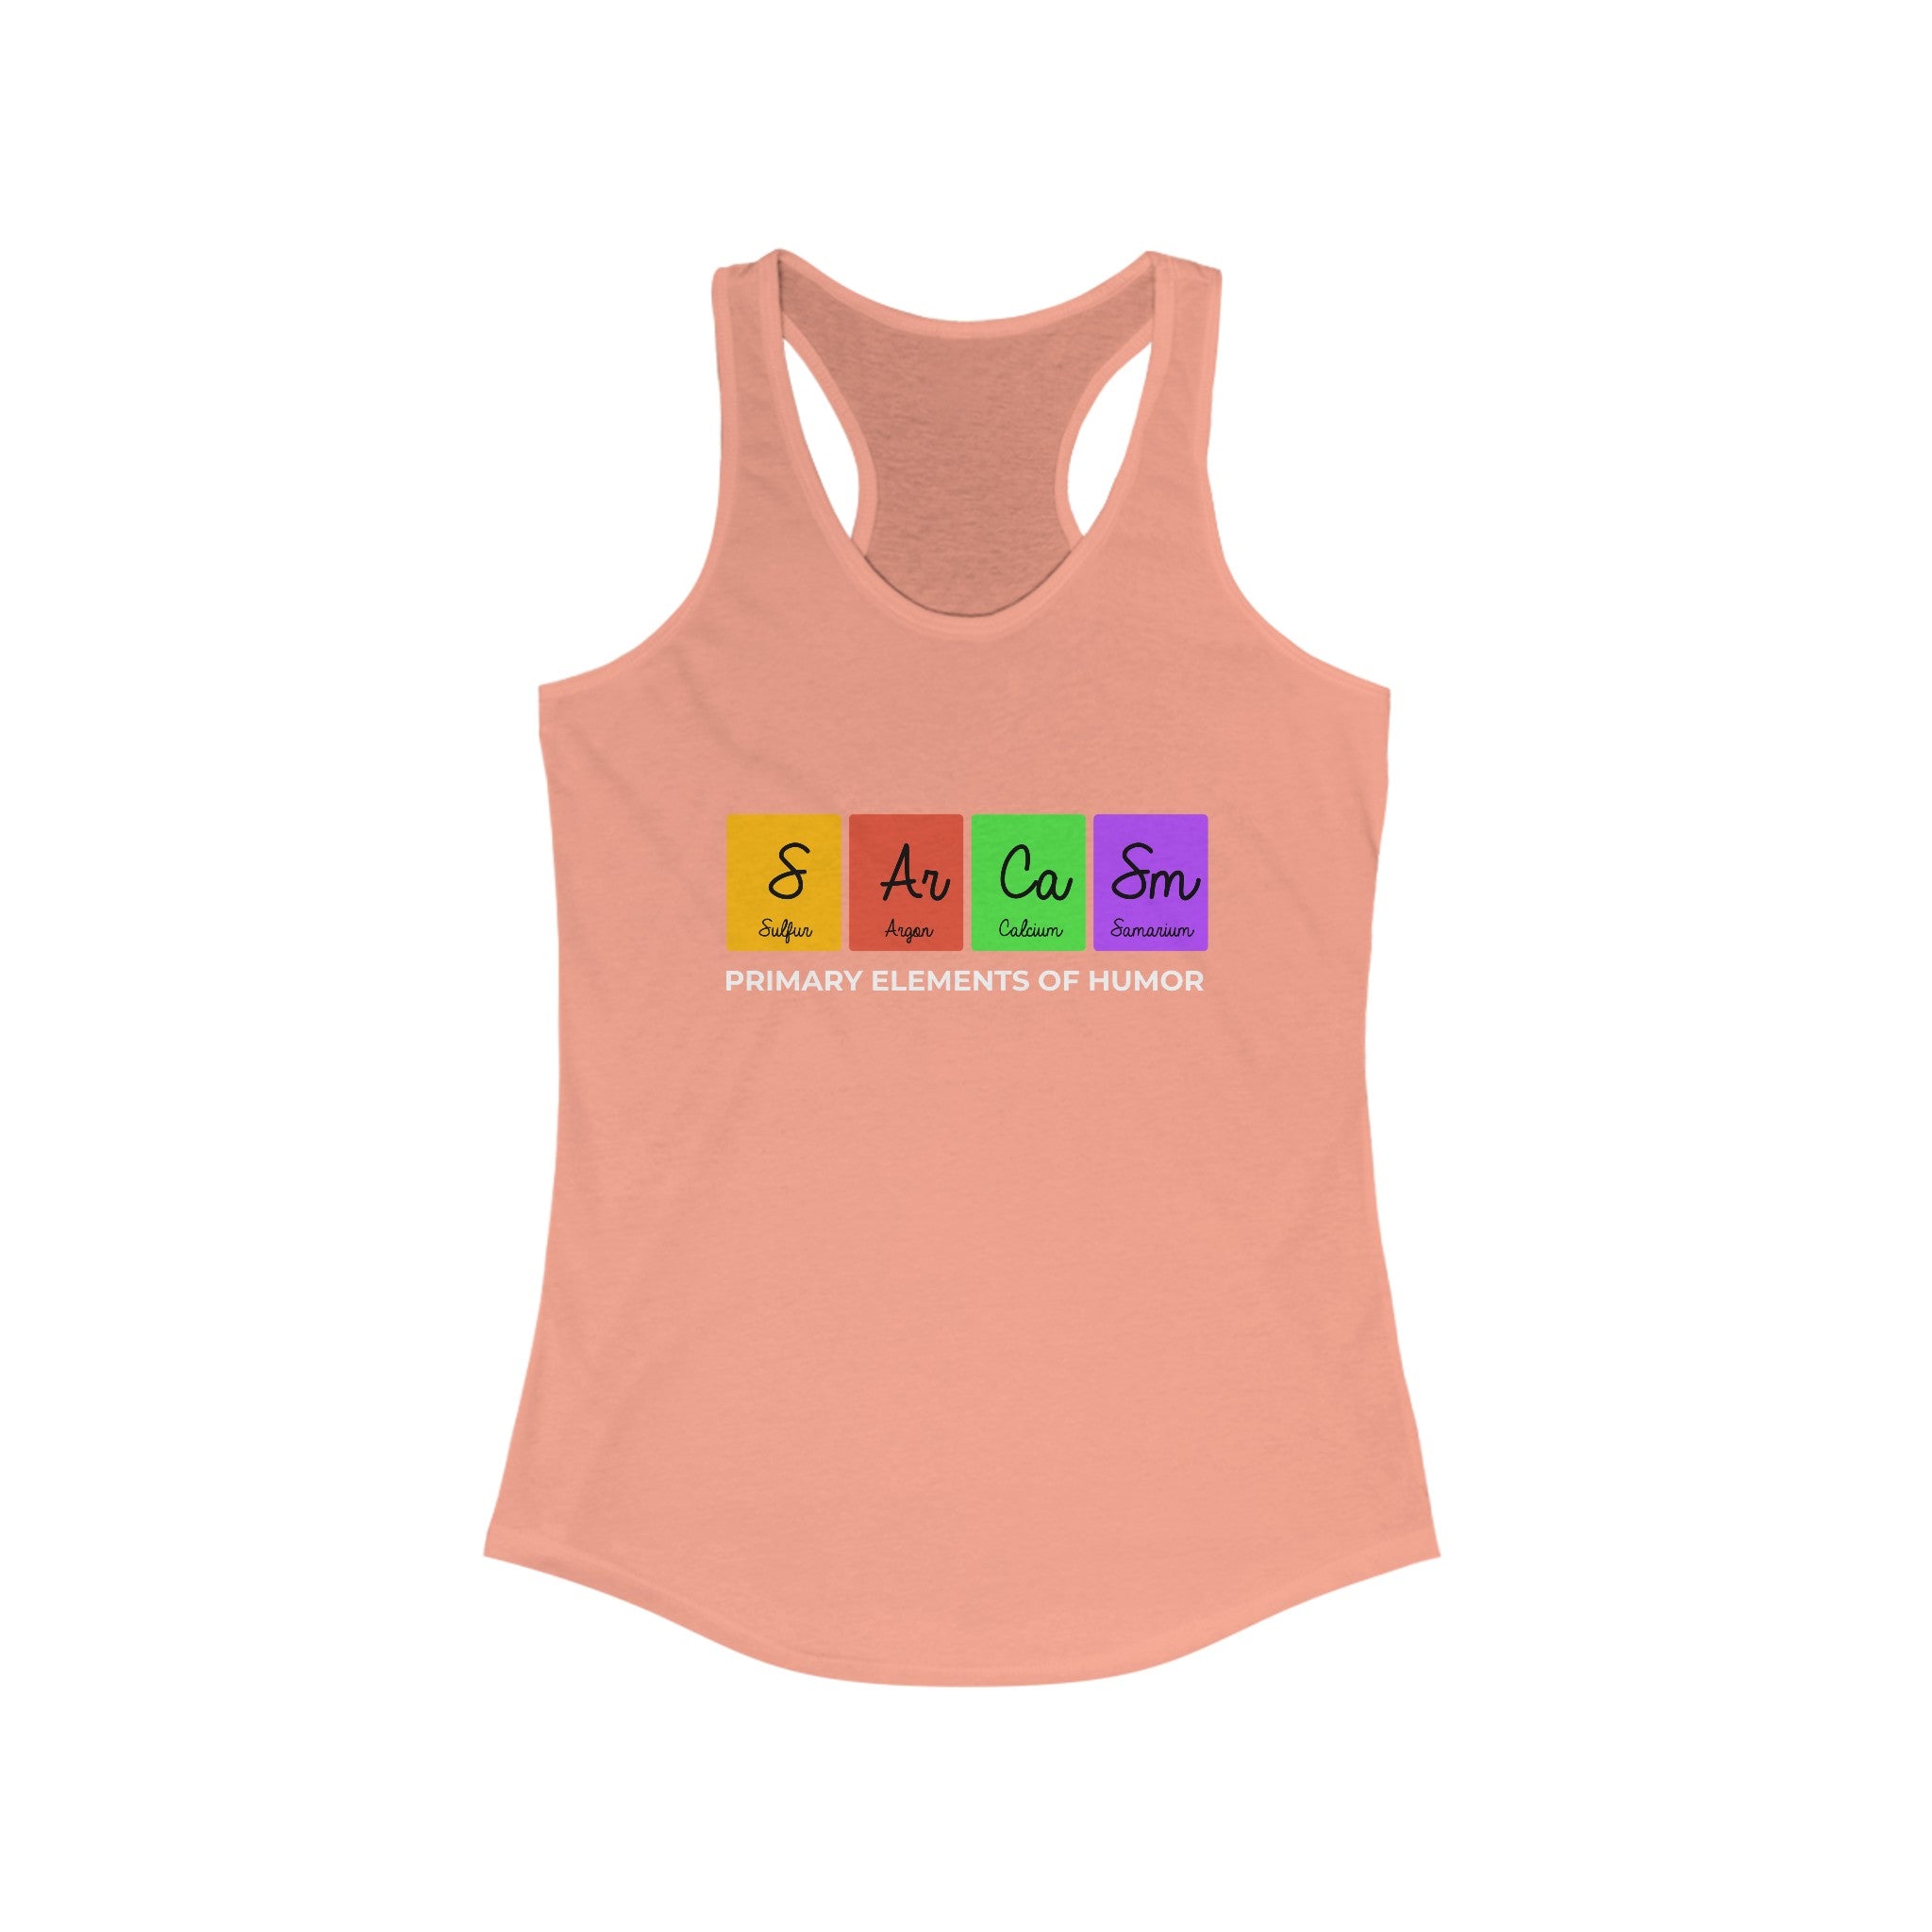 S-Ar-Ca-Sm - Women's Racerback Tank: Peach-colored women's racerback tank top featuring a humor-themed design with elements Sulfur (Sa), Argon (Ar), Calcium (Ca), and Samarium (Sm) from the periodic table, labeled as "Primary Elements of Humor." Lightweight and perfect for an active life.